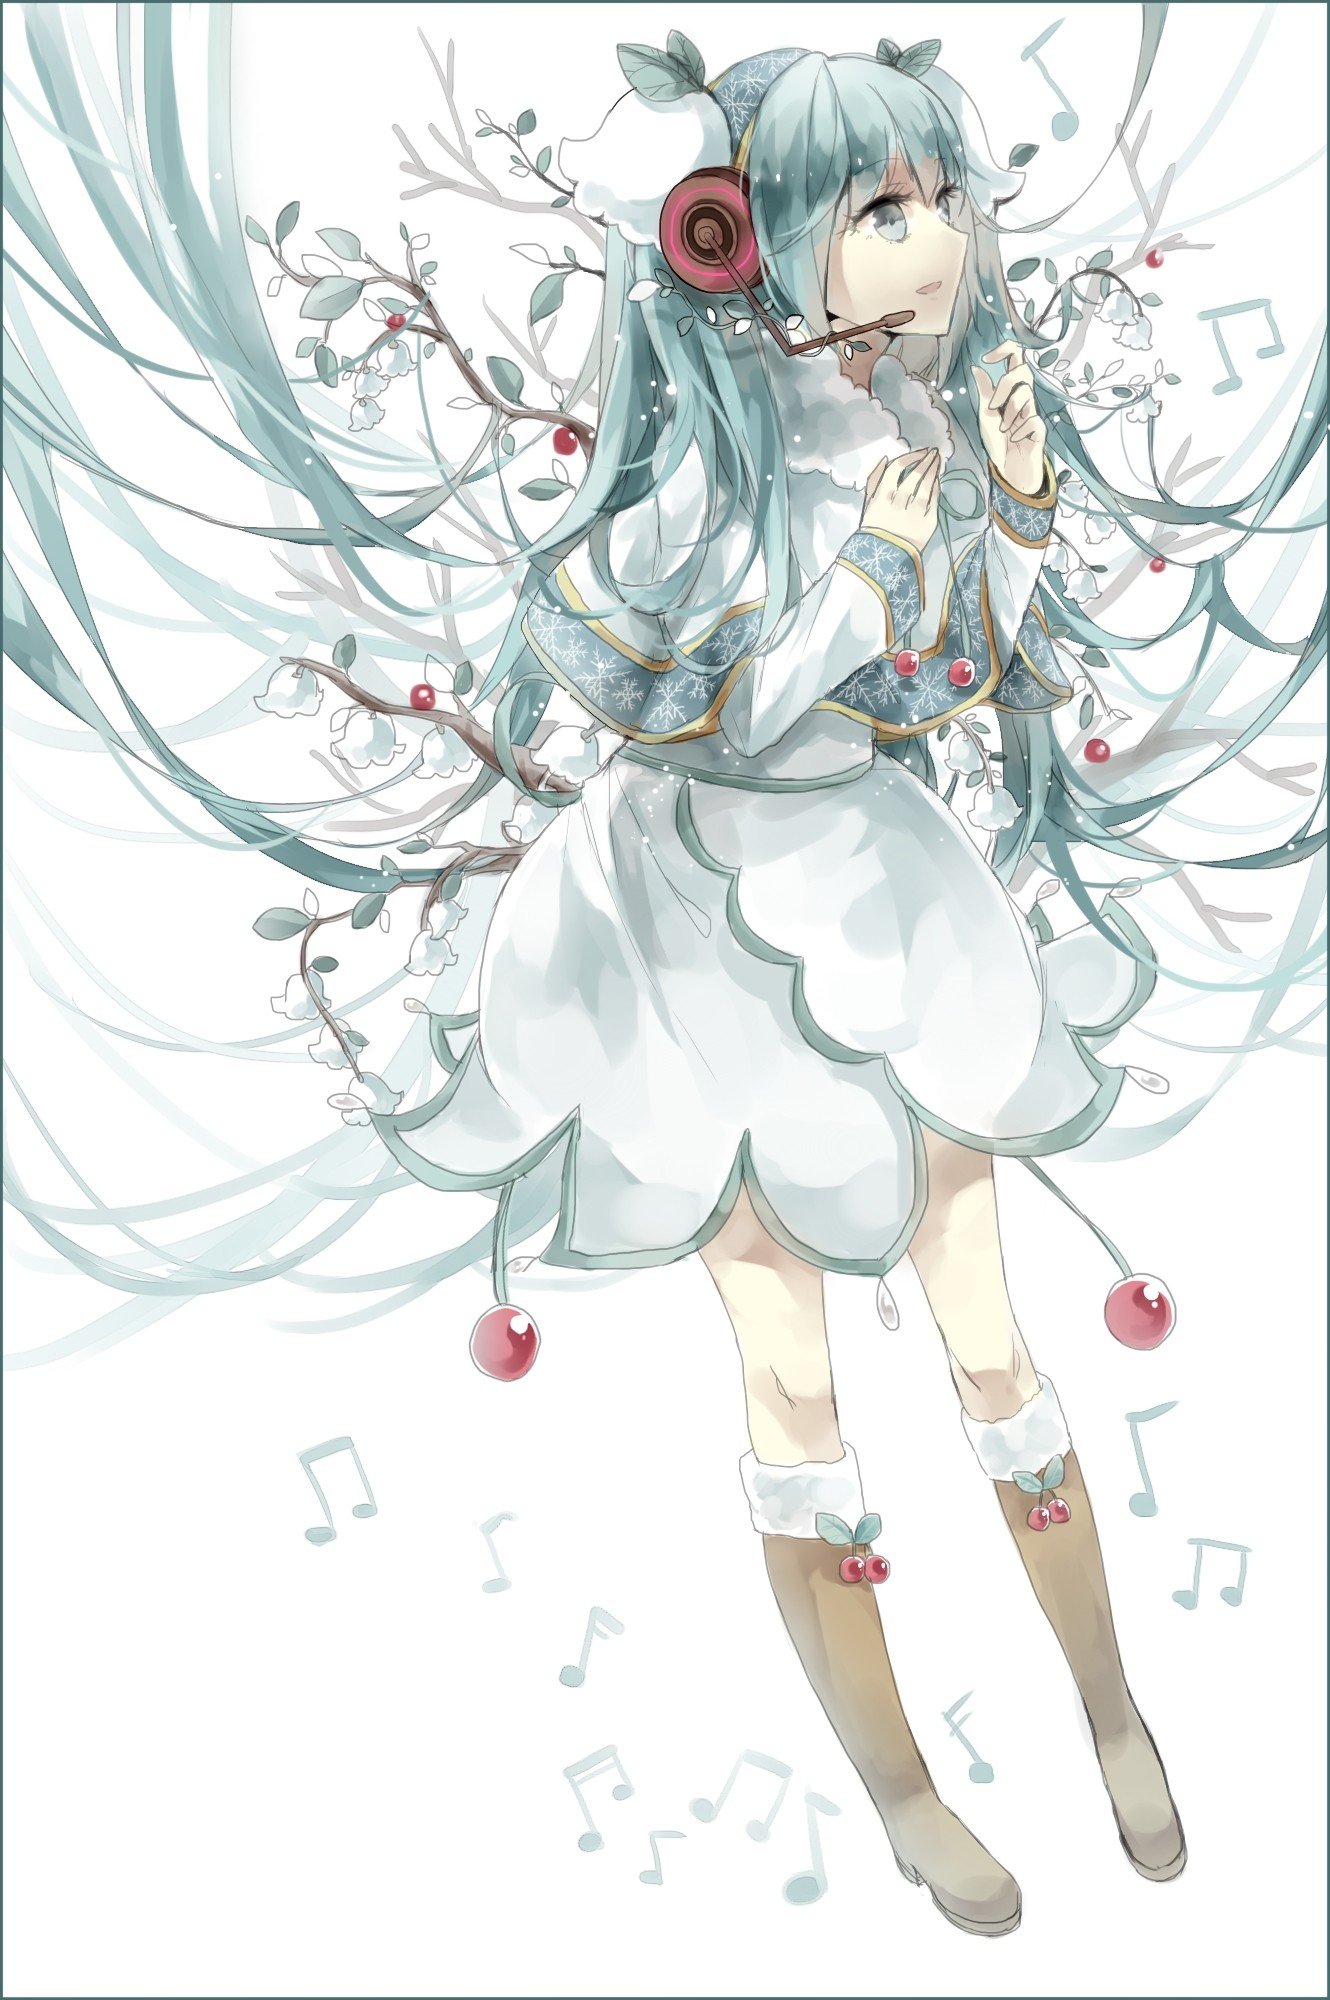 Vocaloid, Hatsune Miku, Flowers, Ribbon, Headphones, Sheet, Branch, Musical notes, Twintails, Snow flakes, Anime girls, Anime Wallpaper